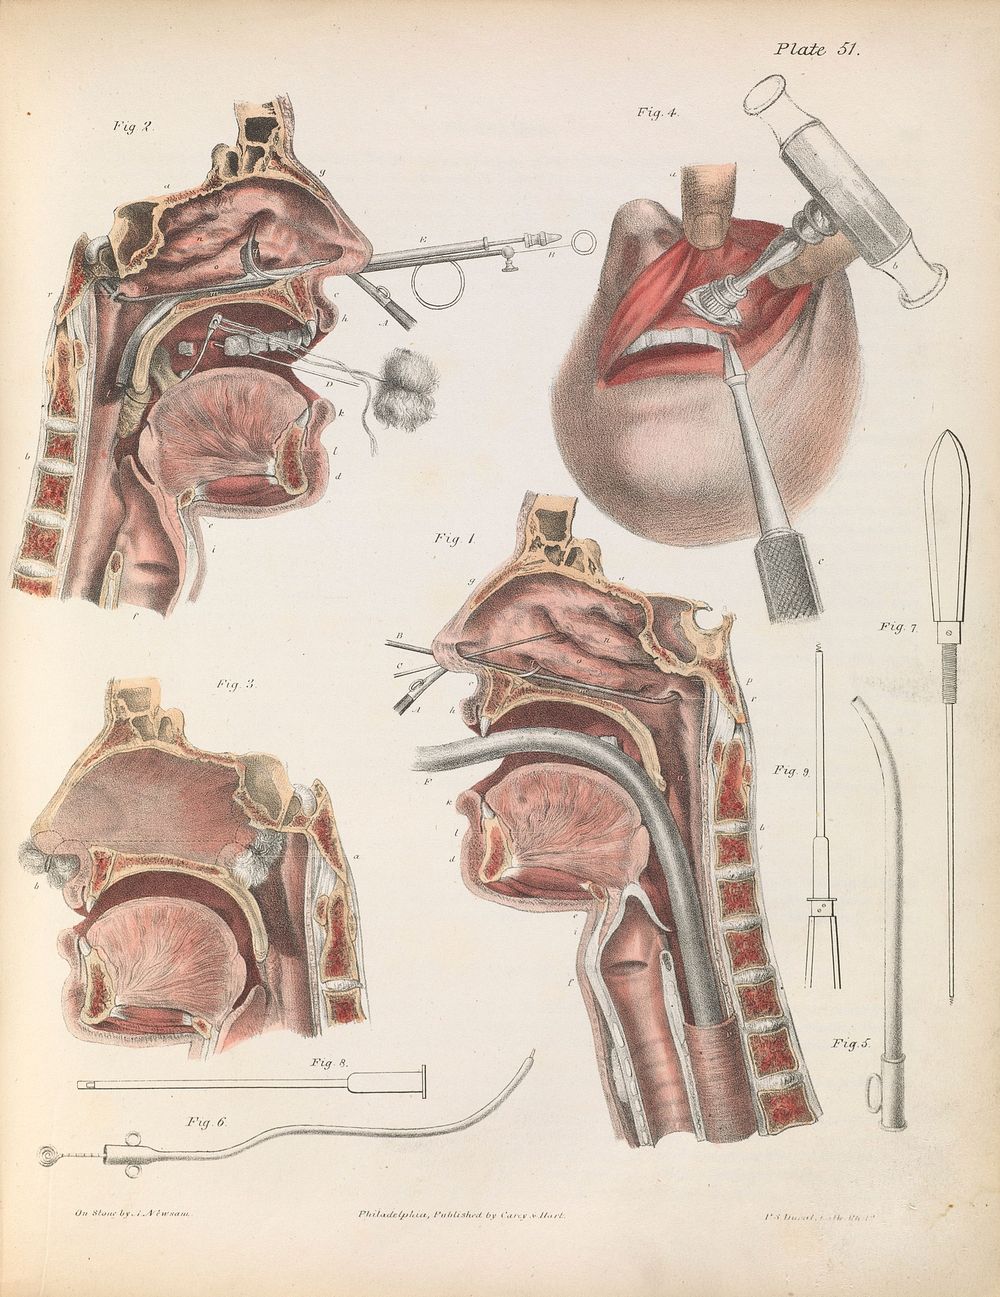 Plate LI. Surgery on the cavities of the face and throat.